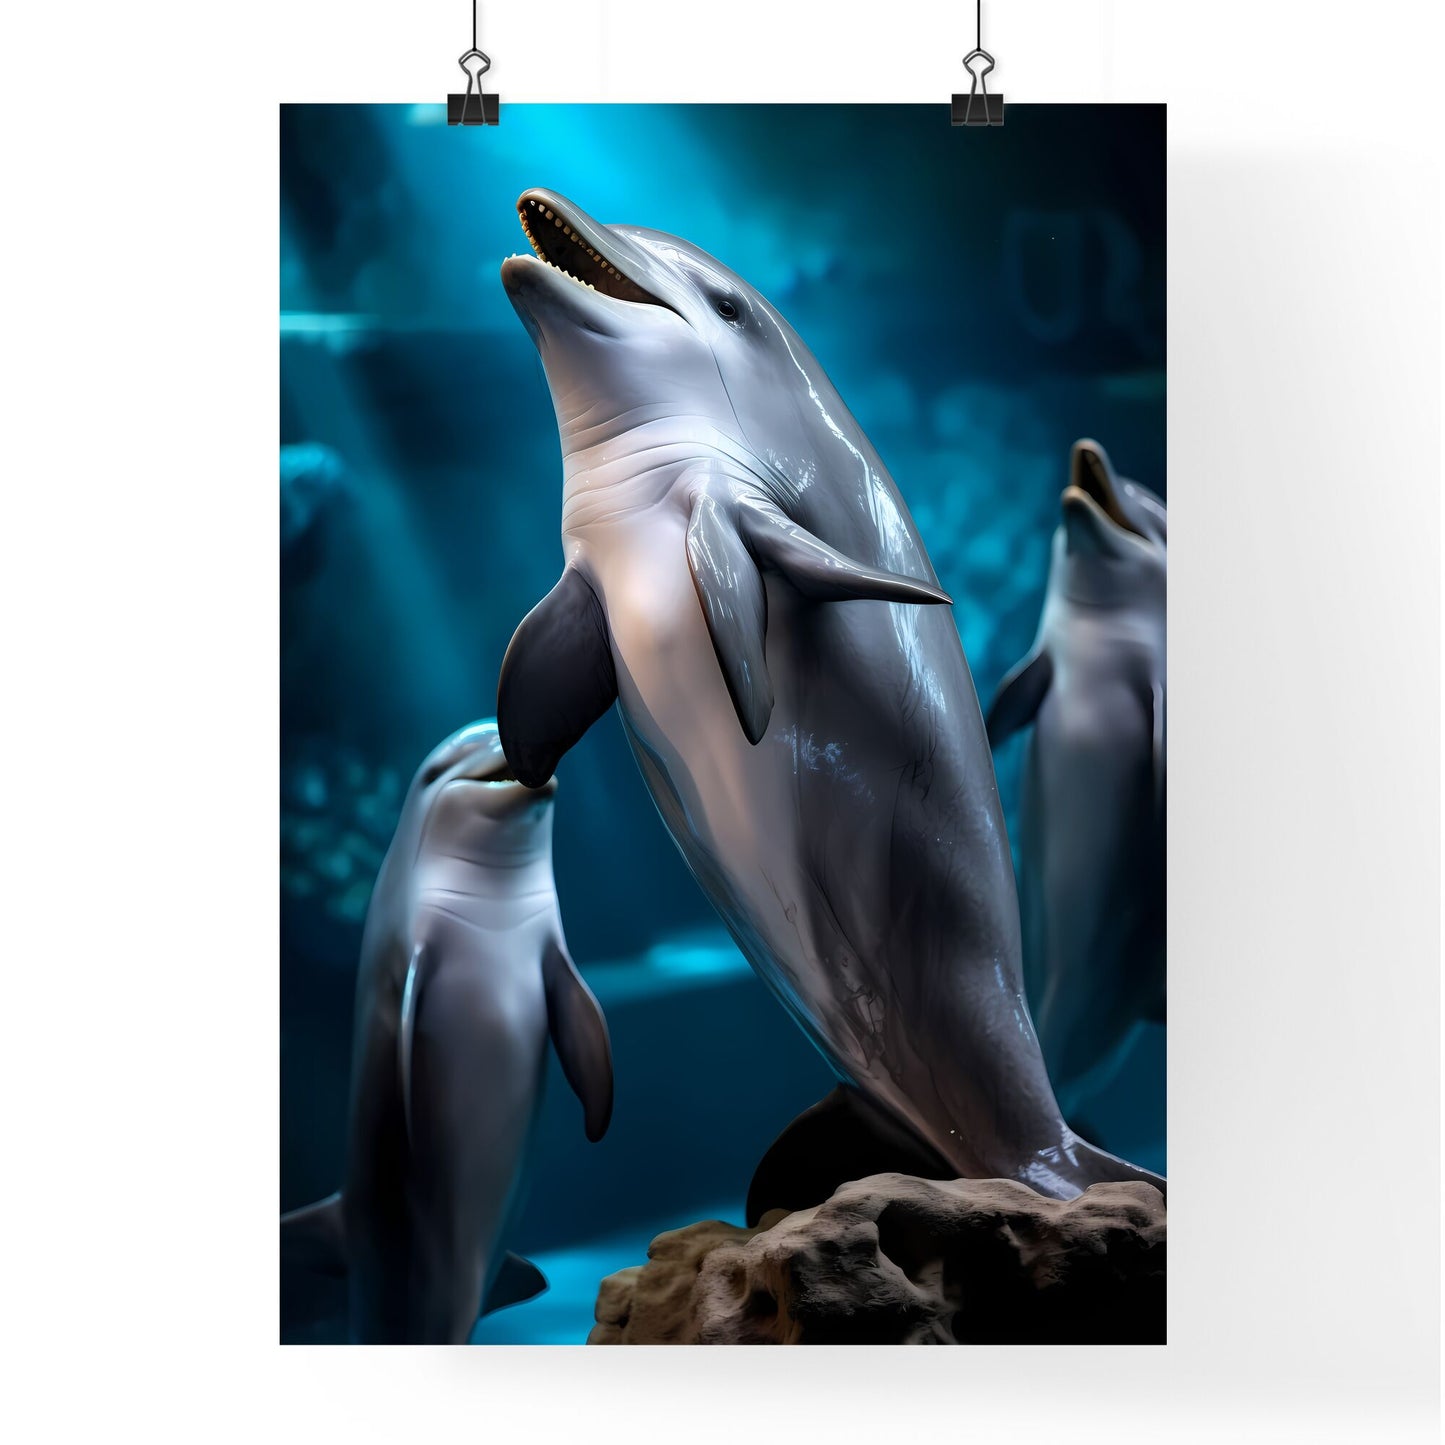 A Poster of A singing dolphin - A Group Of Dolphins In Water Default Title